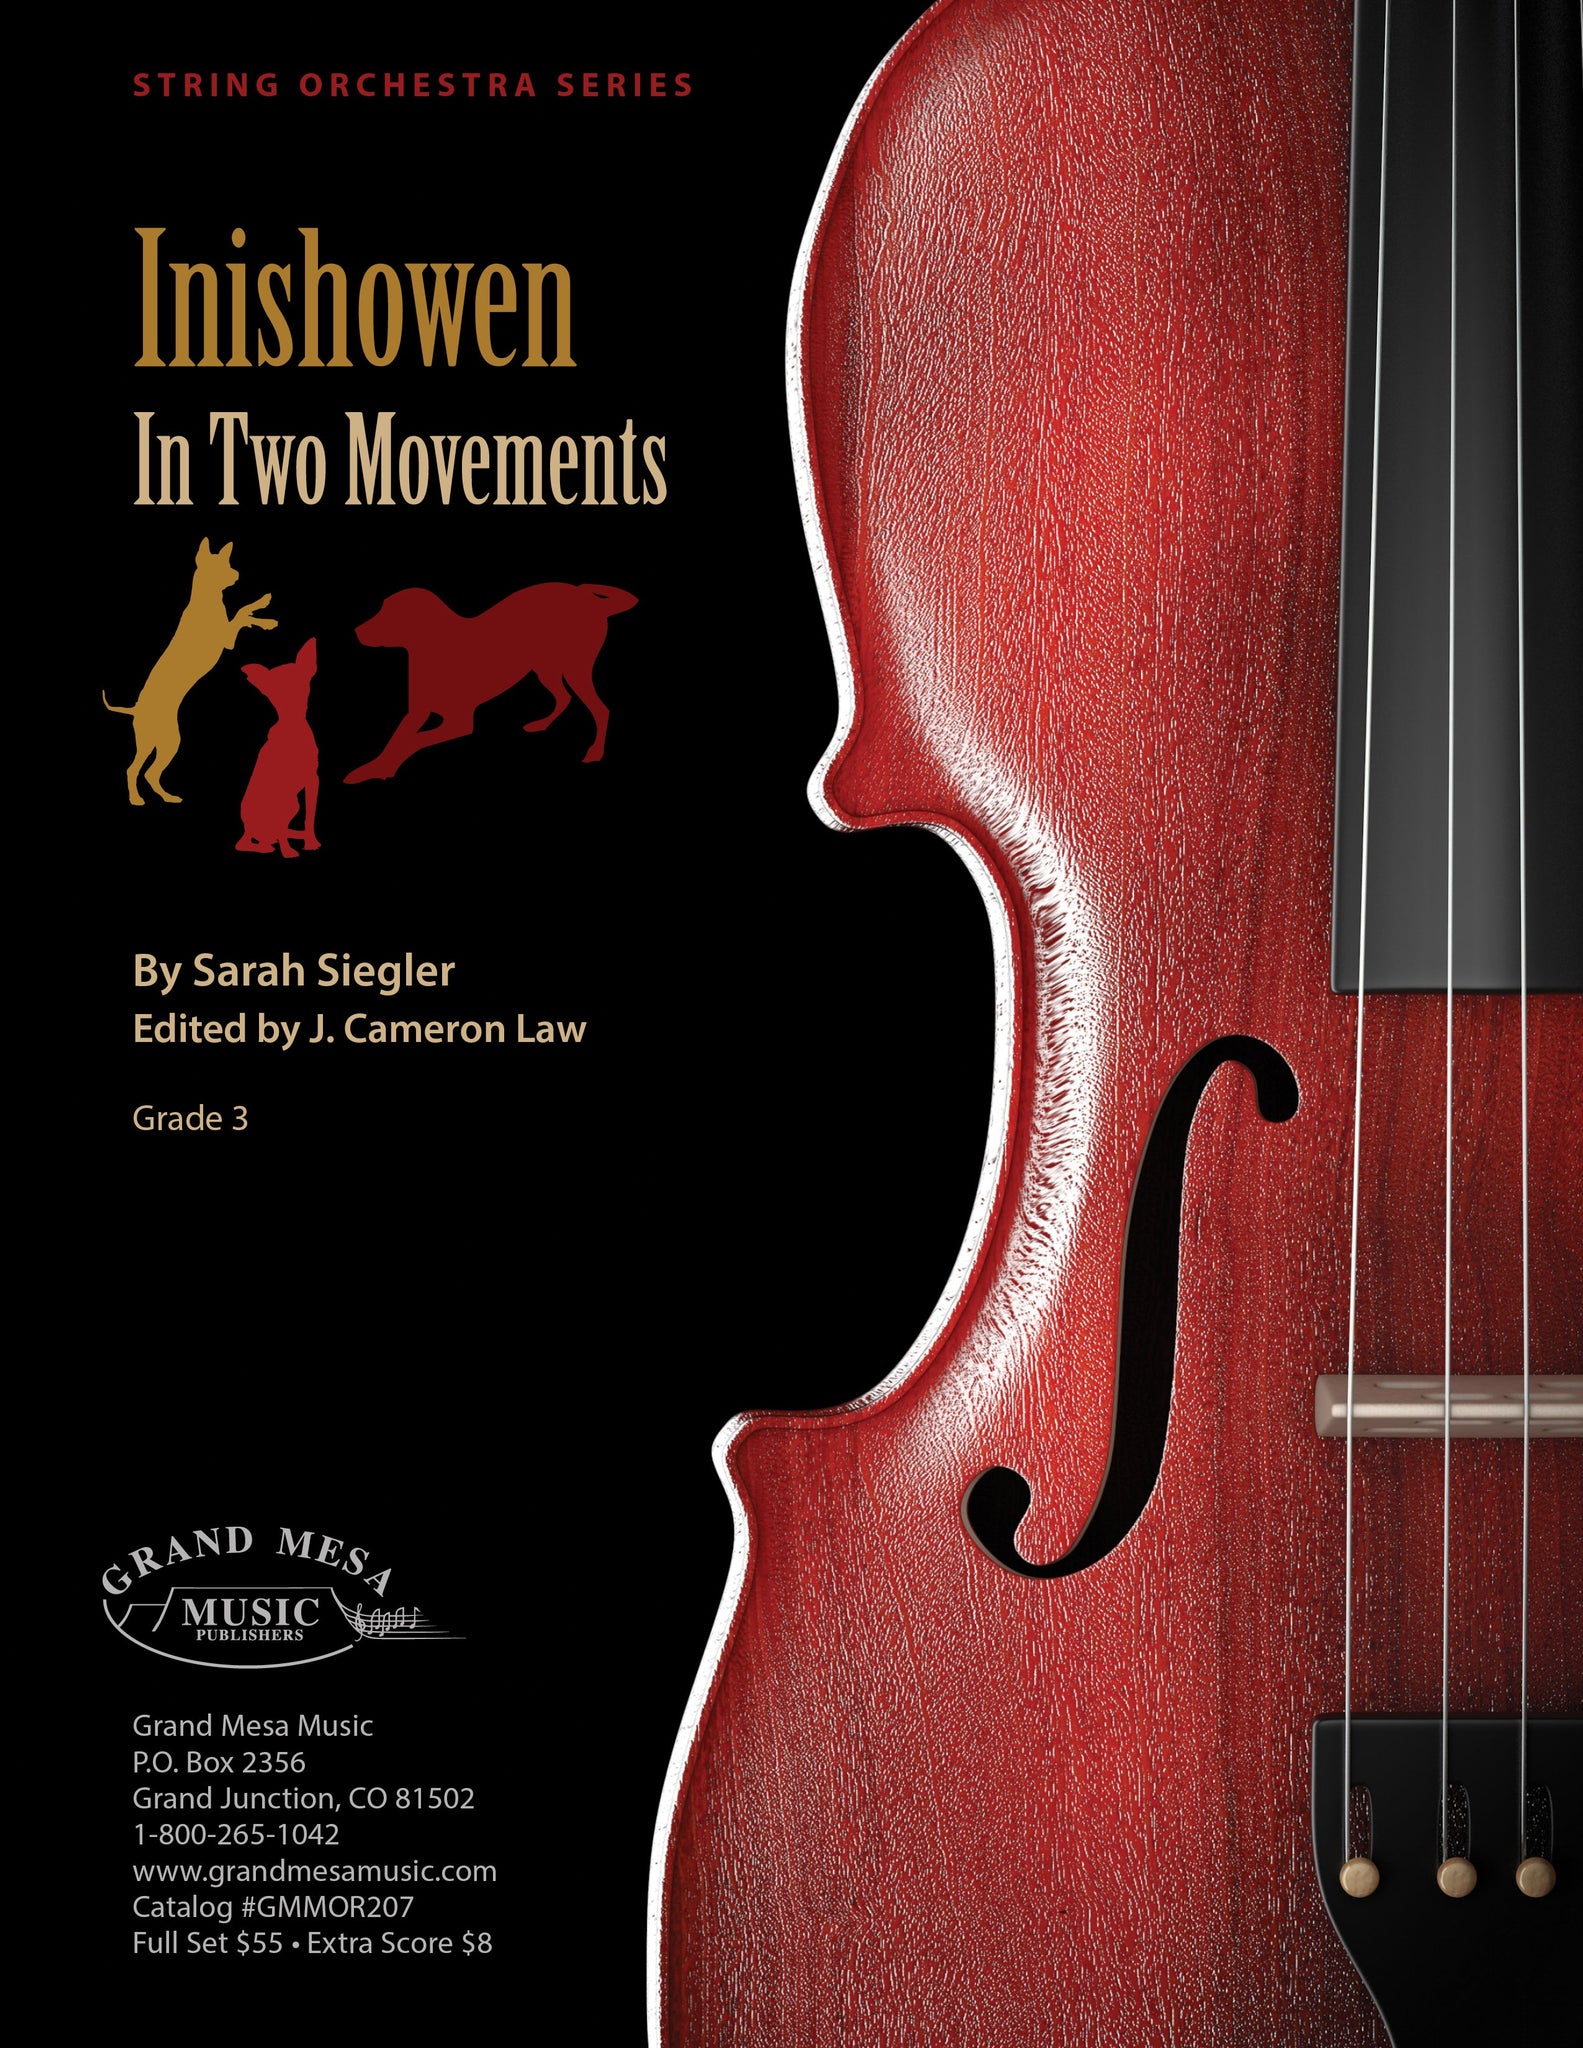 Strings sheet music cover of Inishowen, composed by Sarah Siegler.